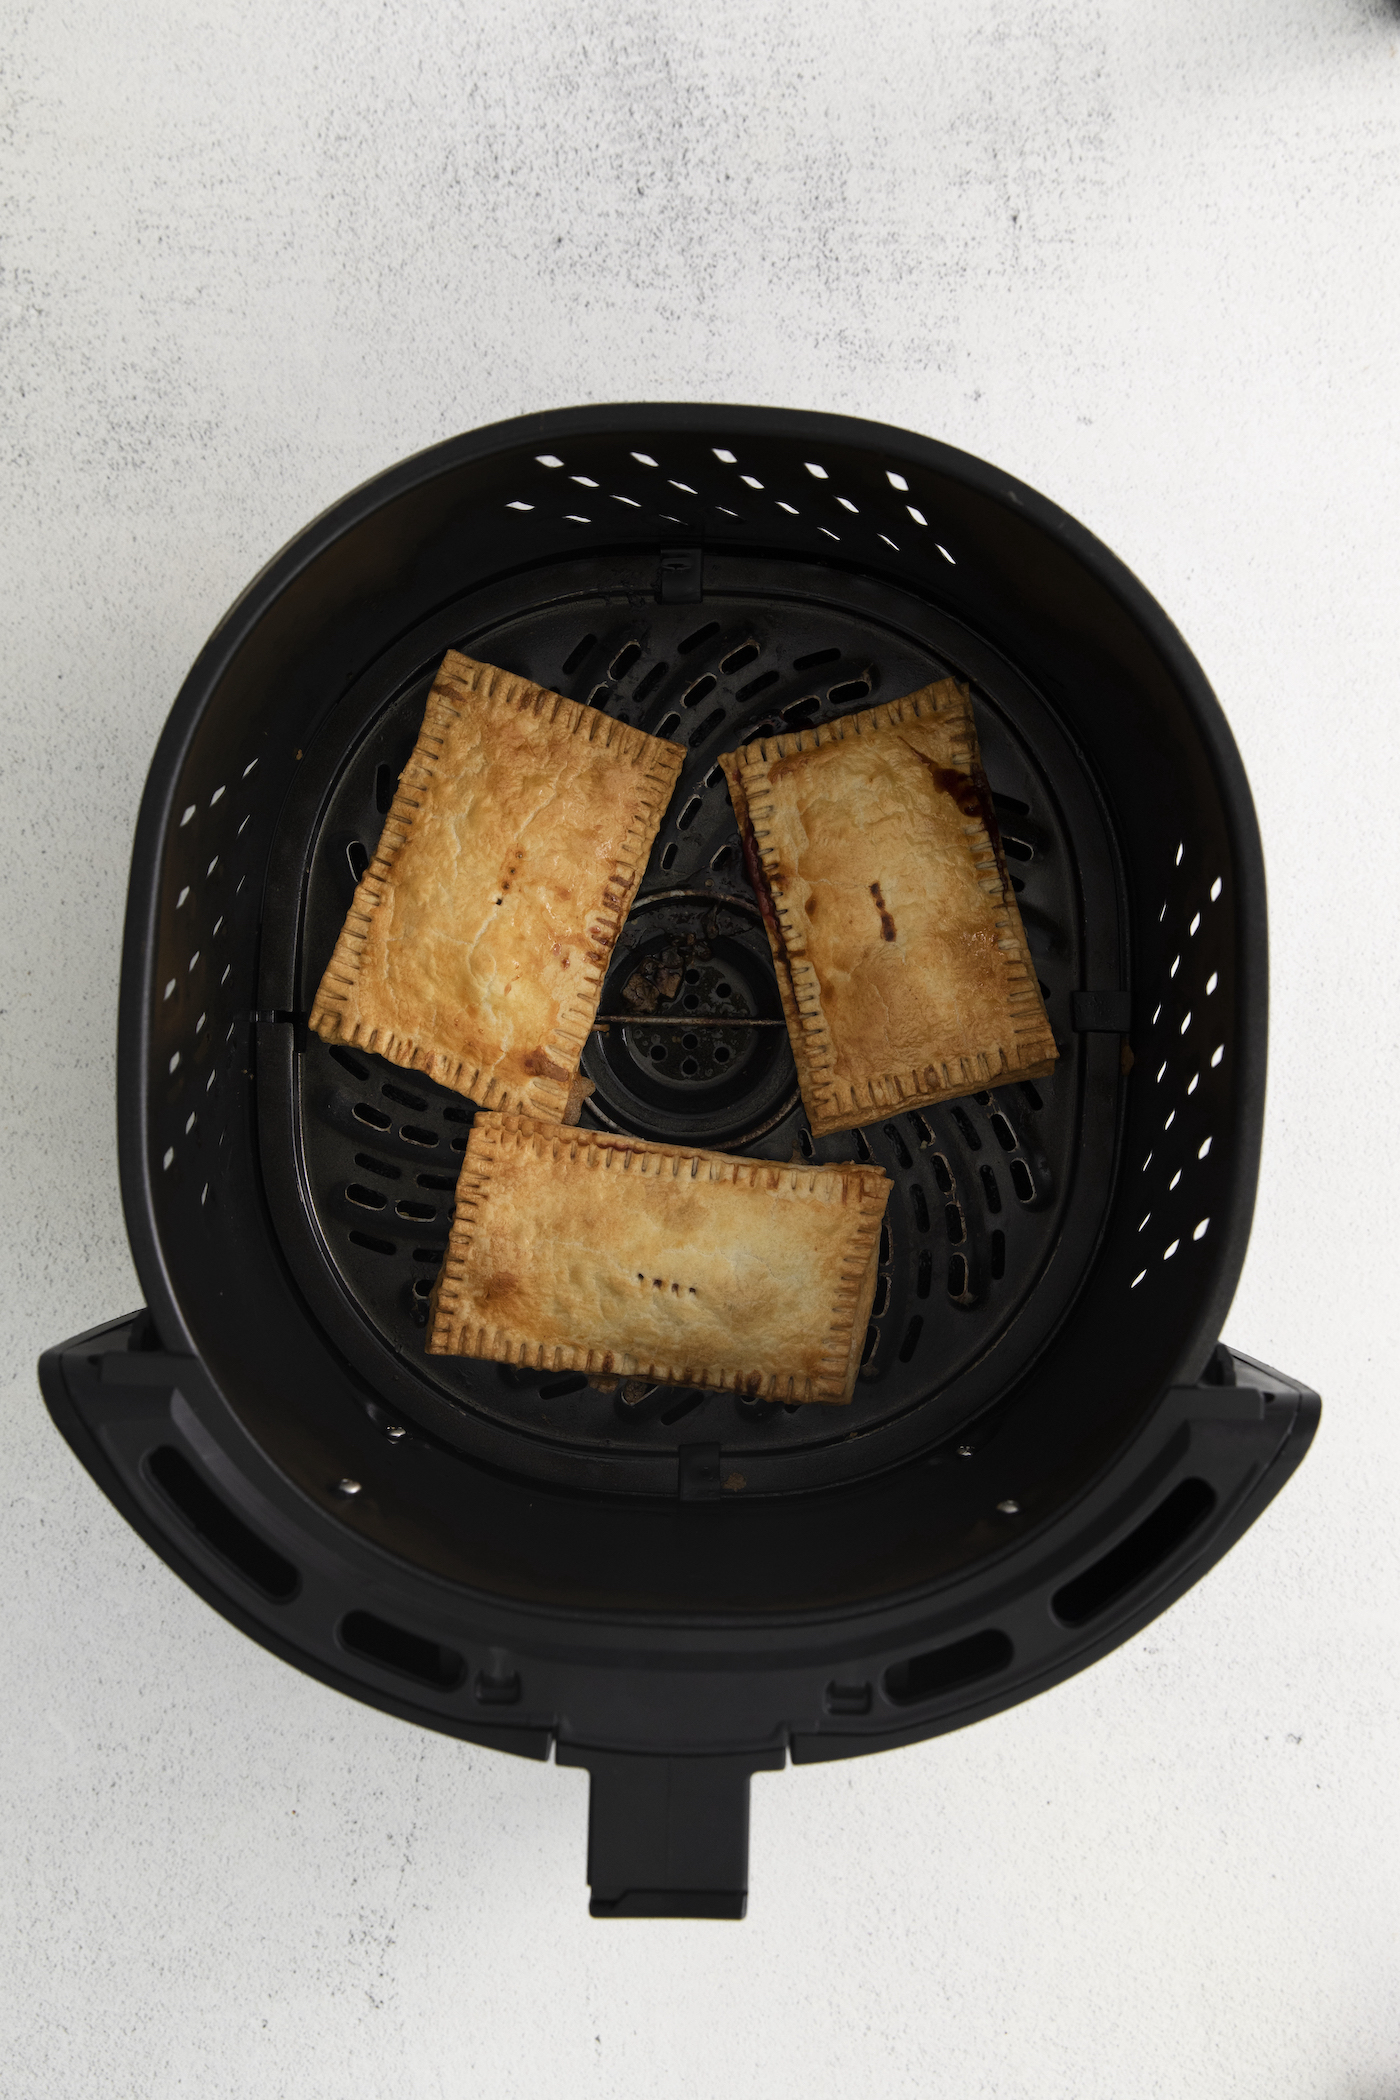 Cooked pop tarts in the air fryer